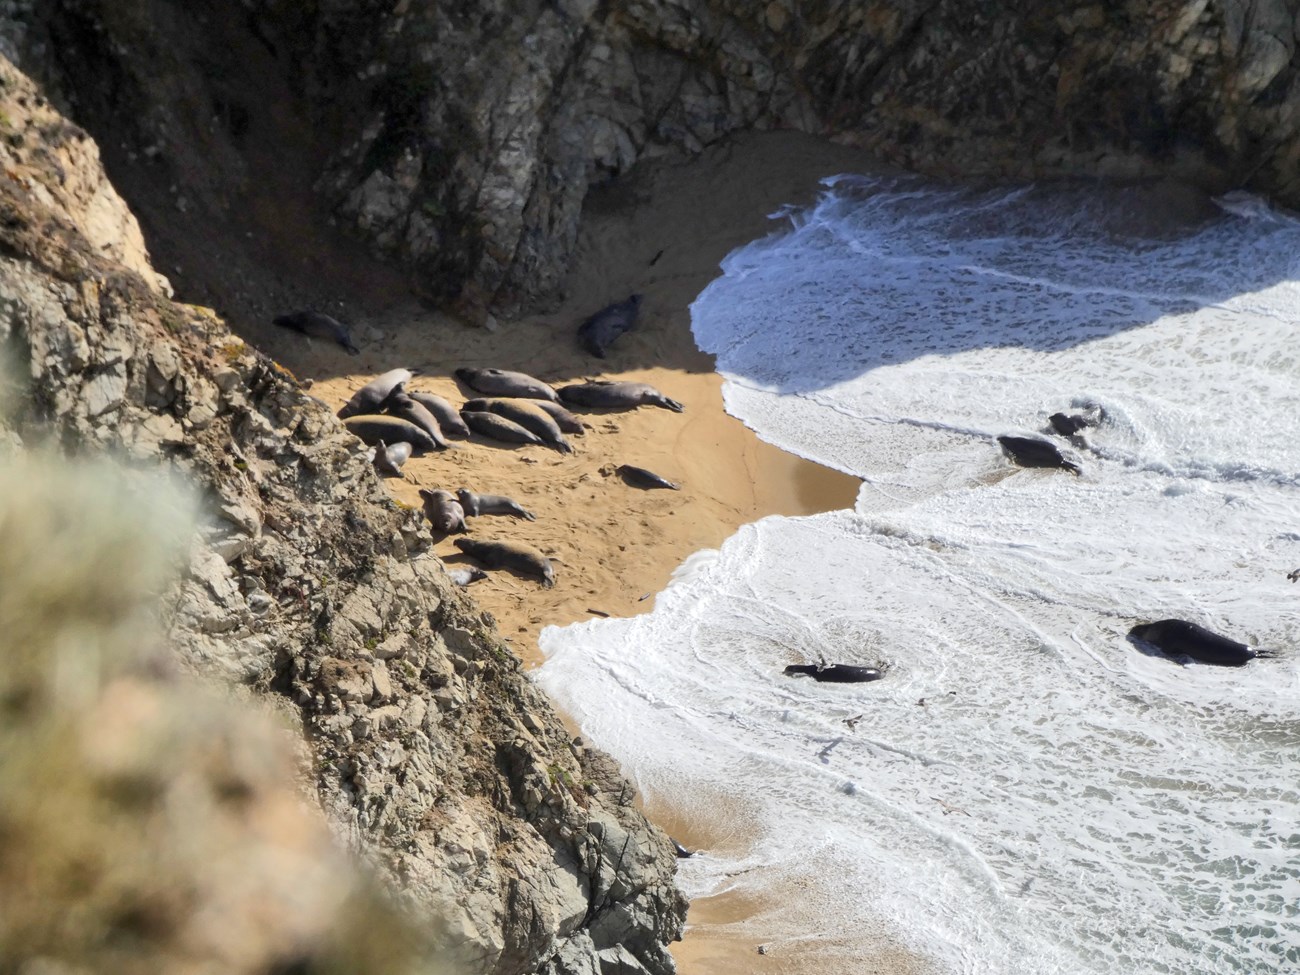 Waves wash up towards a group of seals on beach hemmed in by steep cliffs.